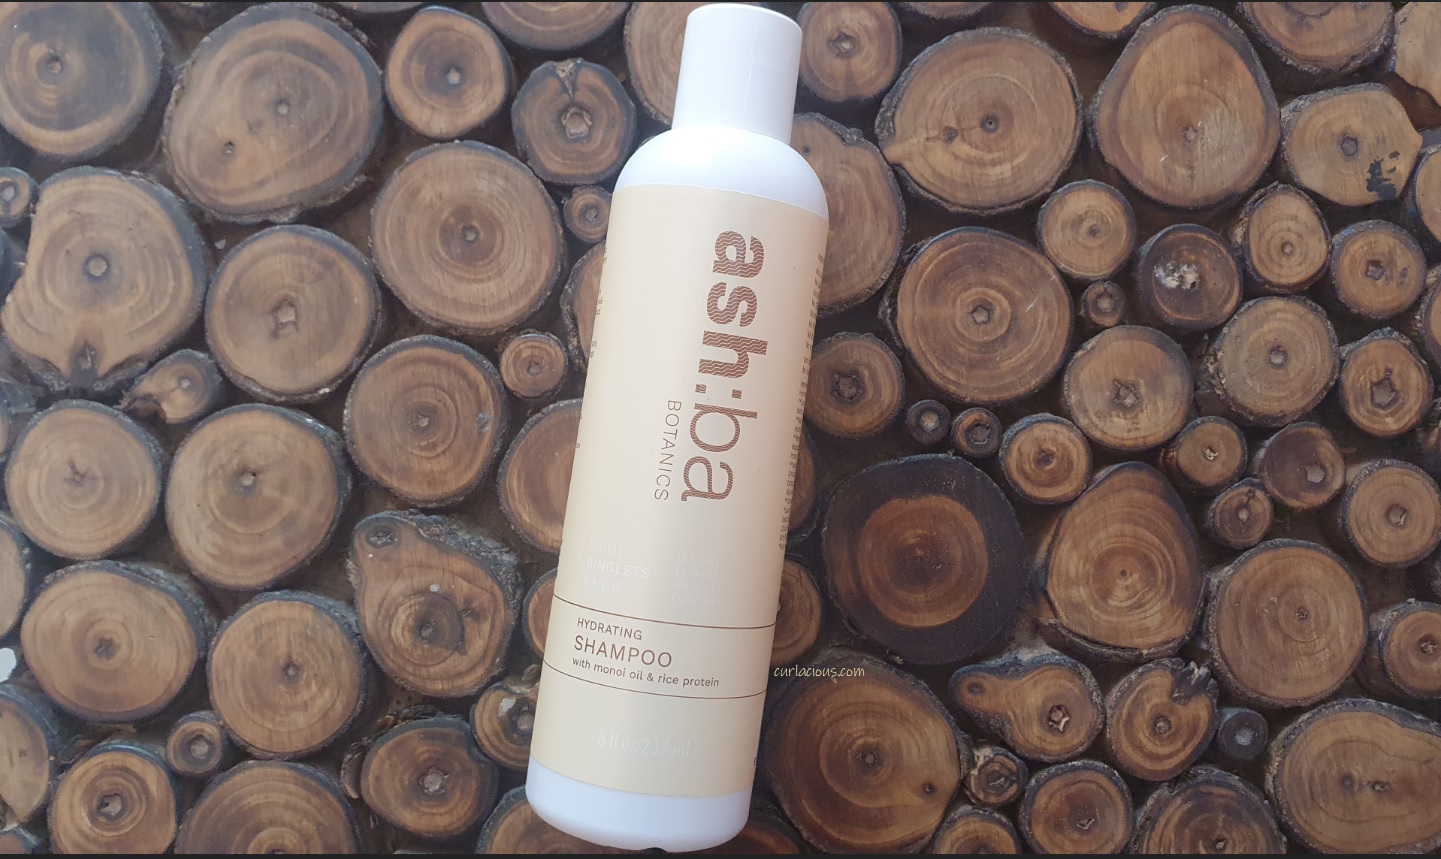 You are currently viewing Ash:Ba Botanics Hydrating Shampoo Review